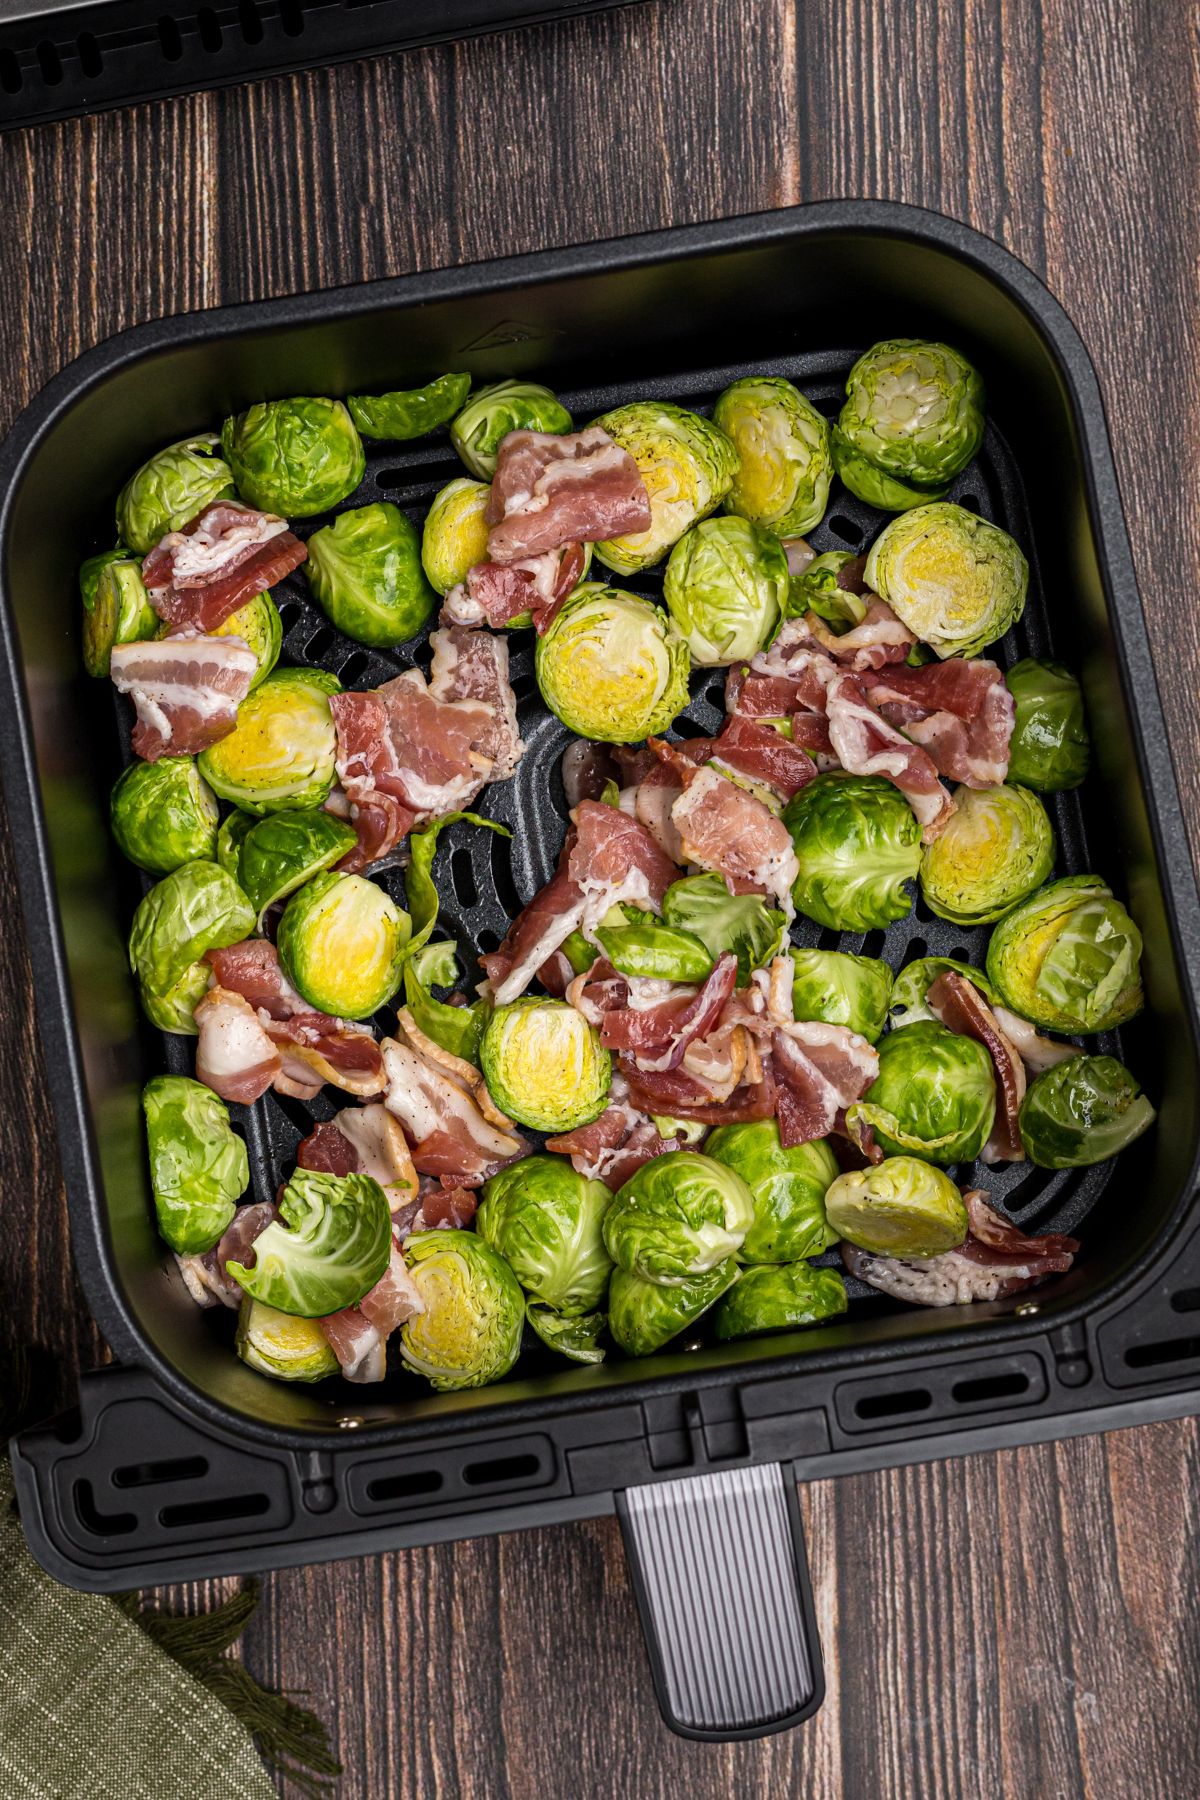 Uncooked seasoned brussels sprouts and bacon pieces in the air fryer basket.